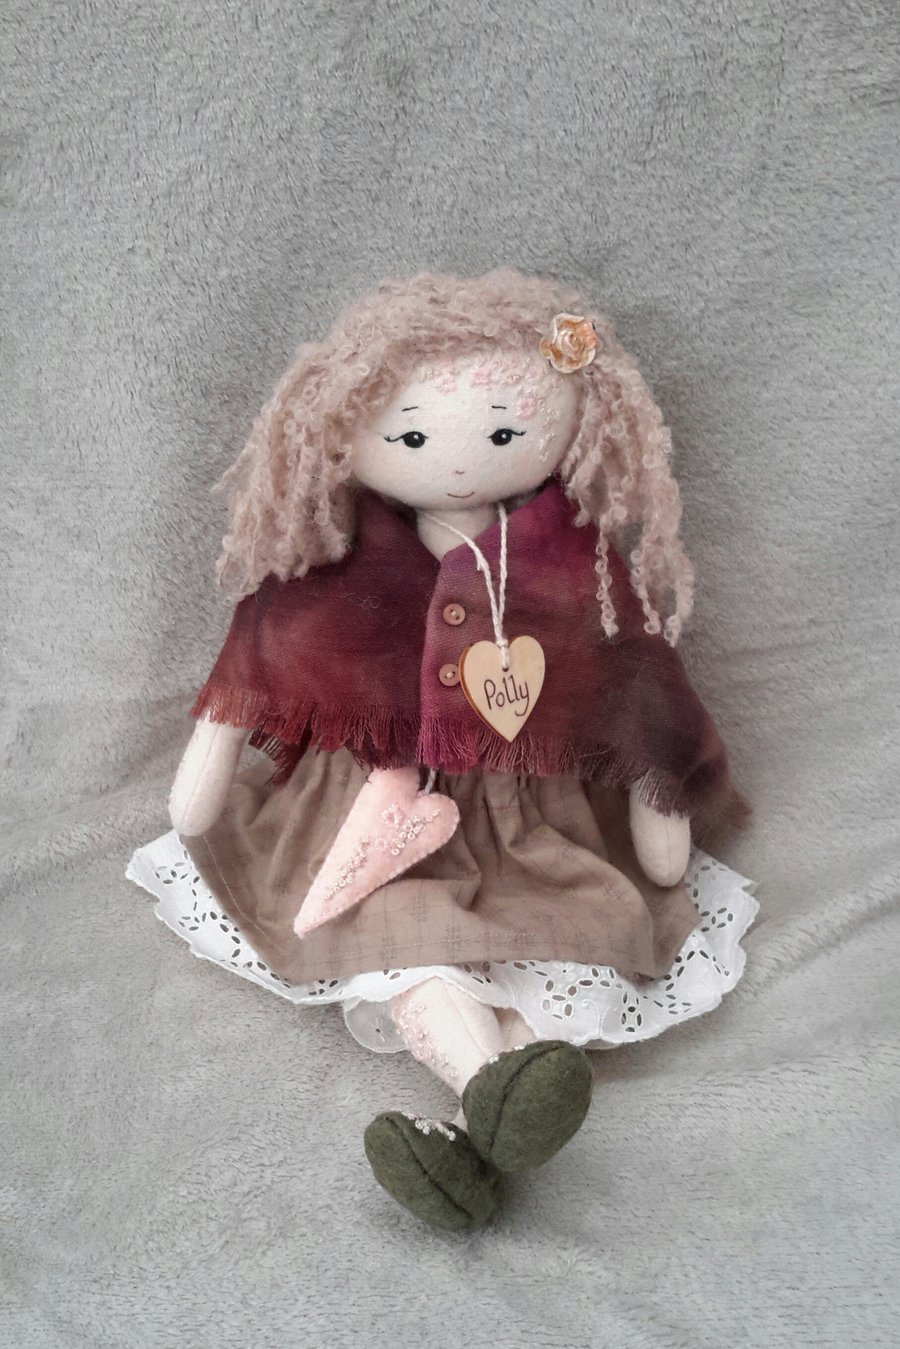 Polly, Hand Embroidered Collectable Cloth Doll, Handmade Keepsake Doll